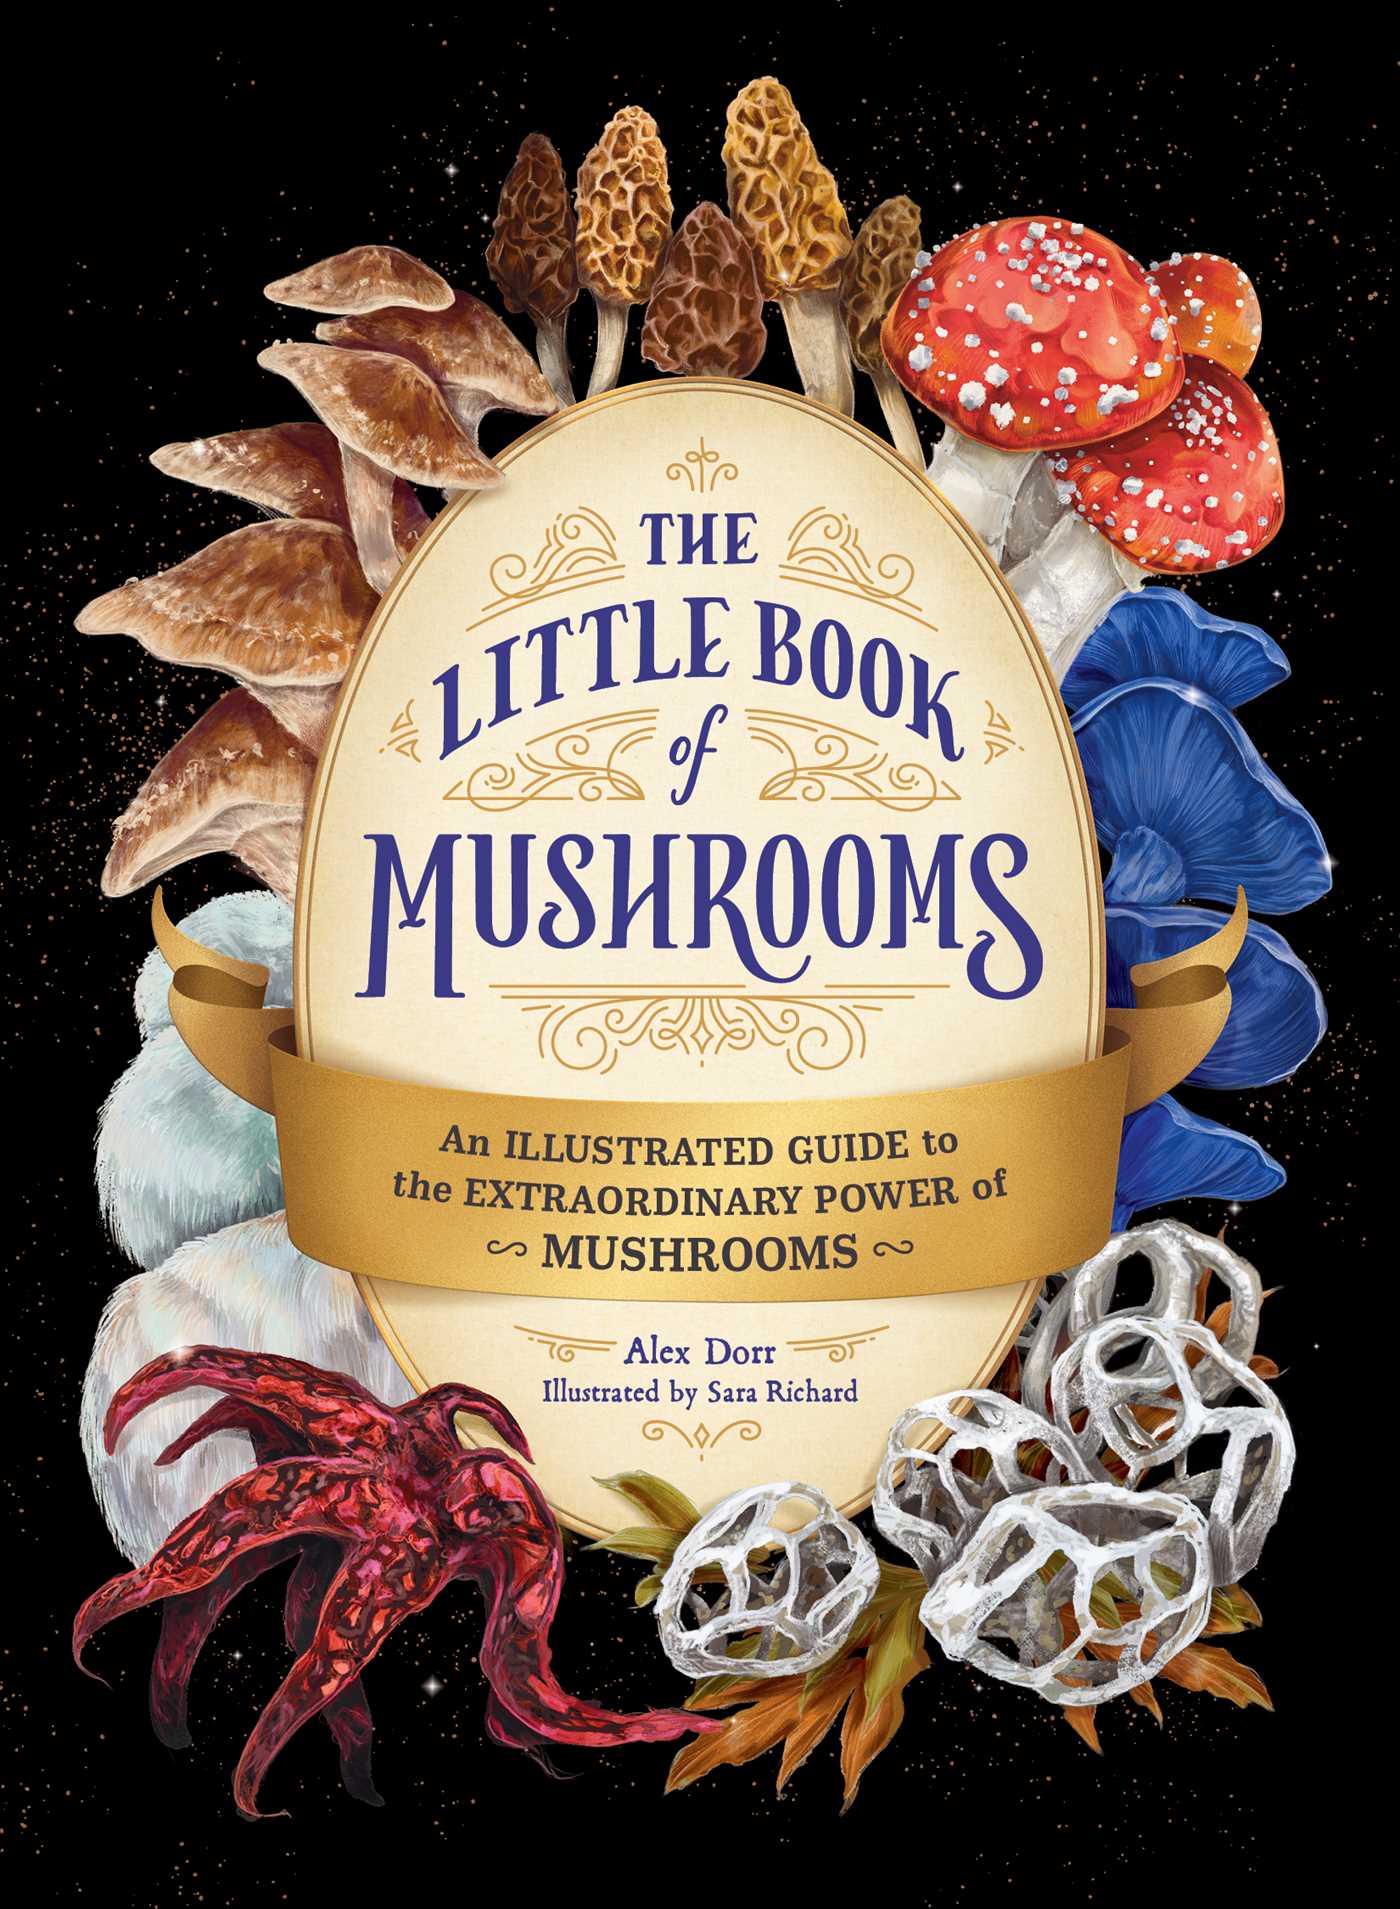 Post: The Little Book of Mushrooms By Alex Dorr, Illustrated by Sara RichardReview